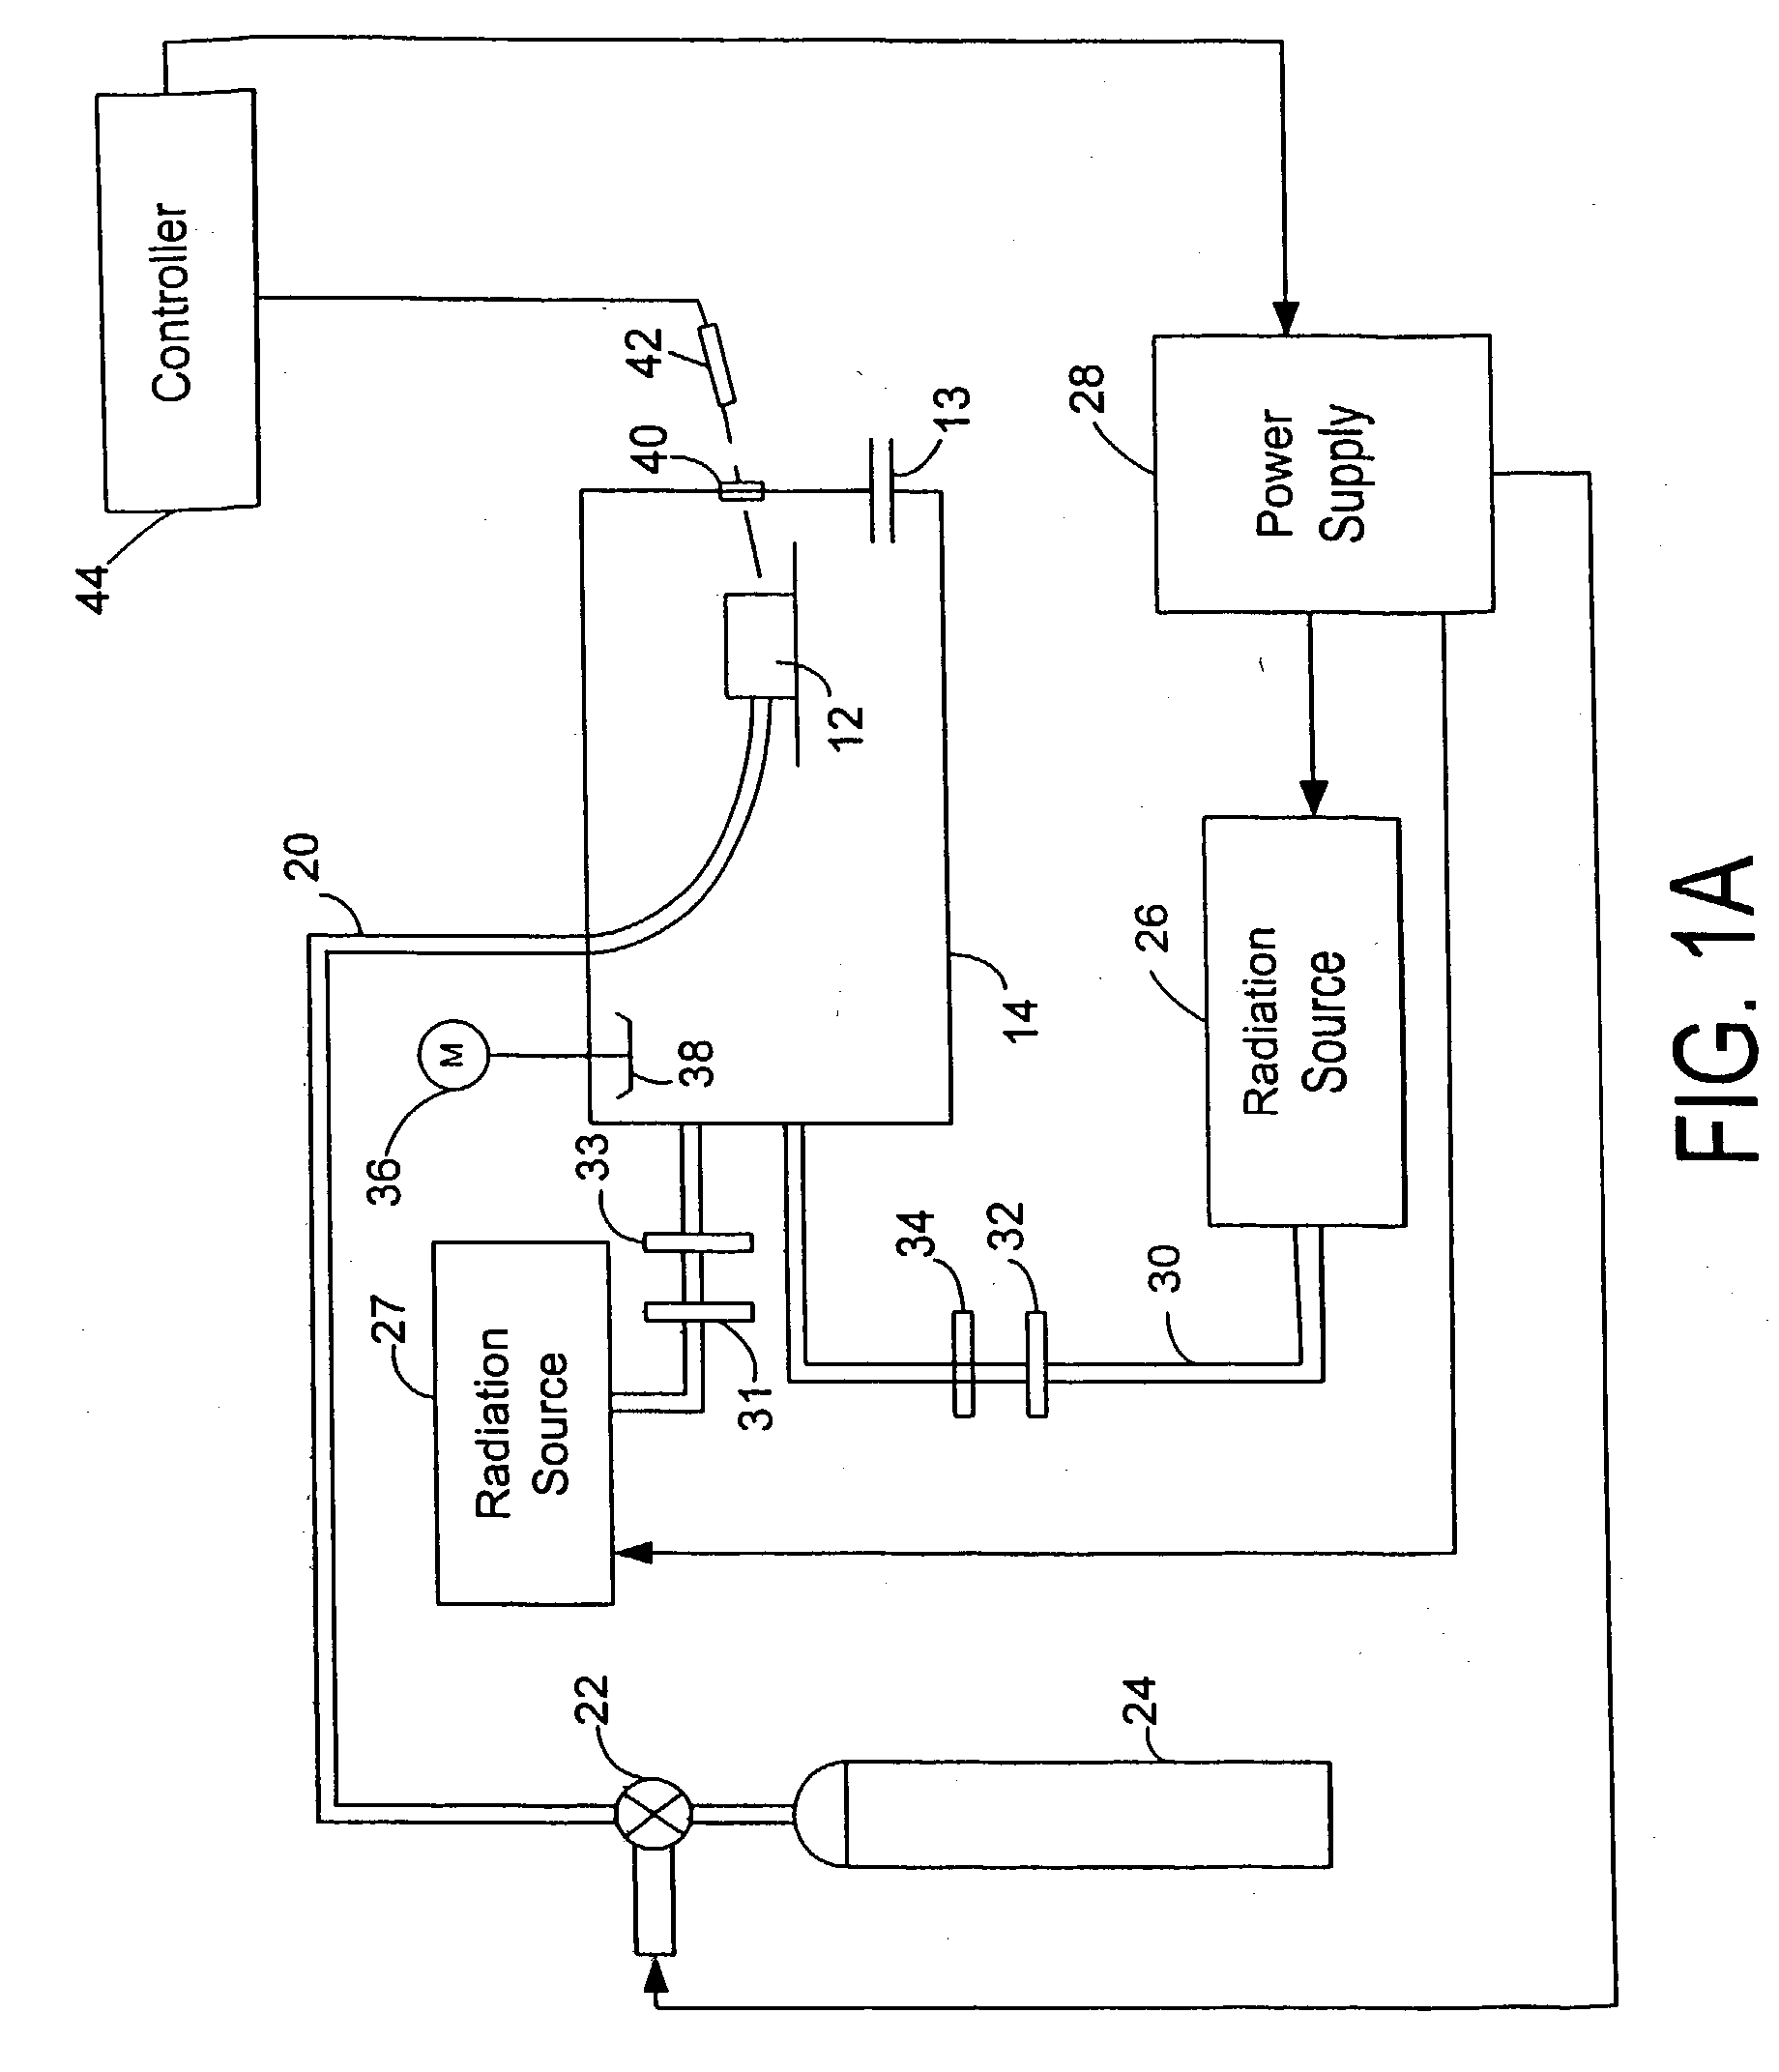 Plasma generation and processing with multiple radiation sources